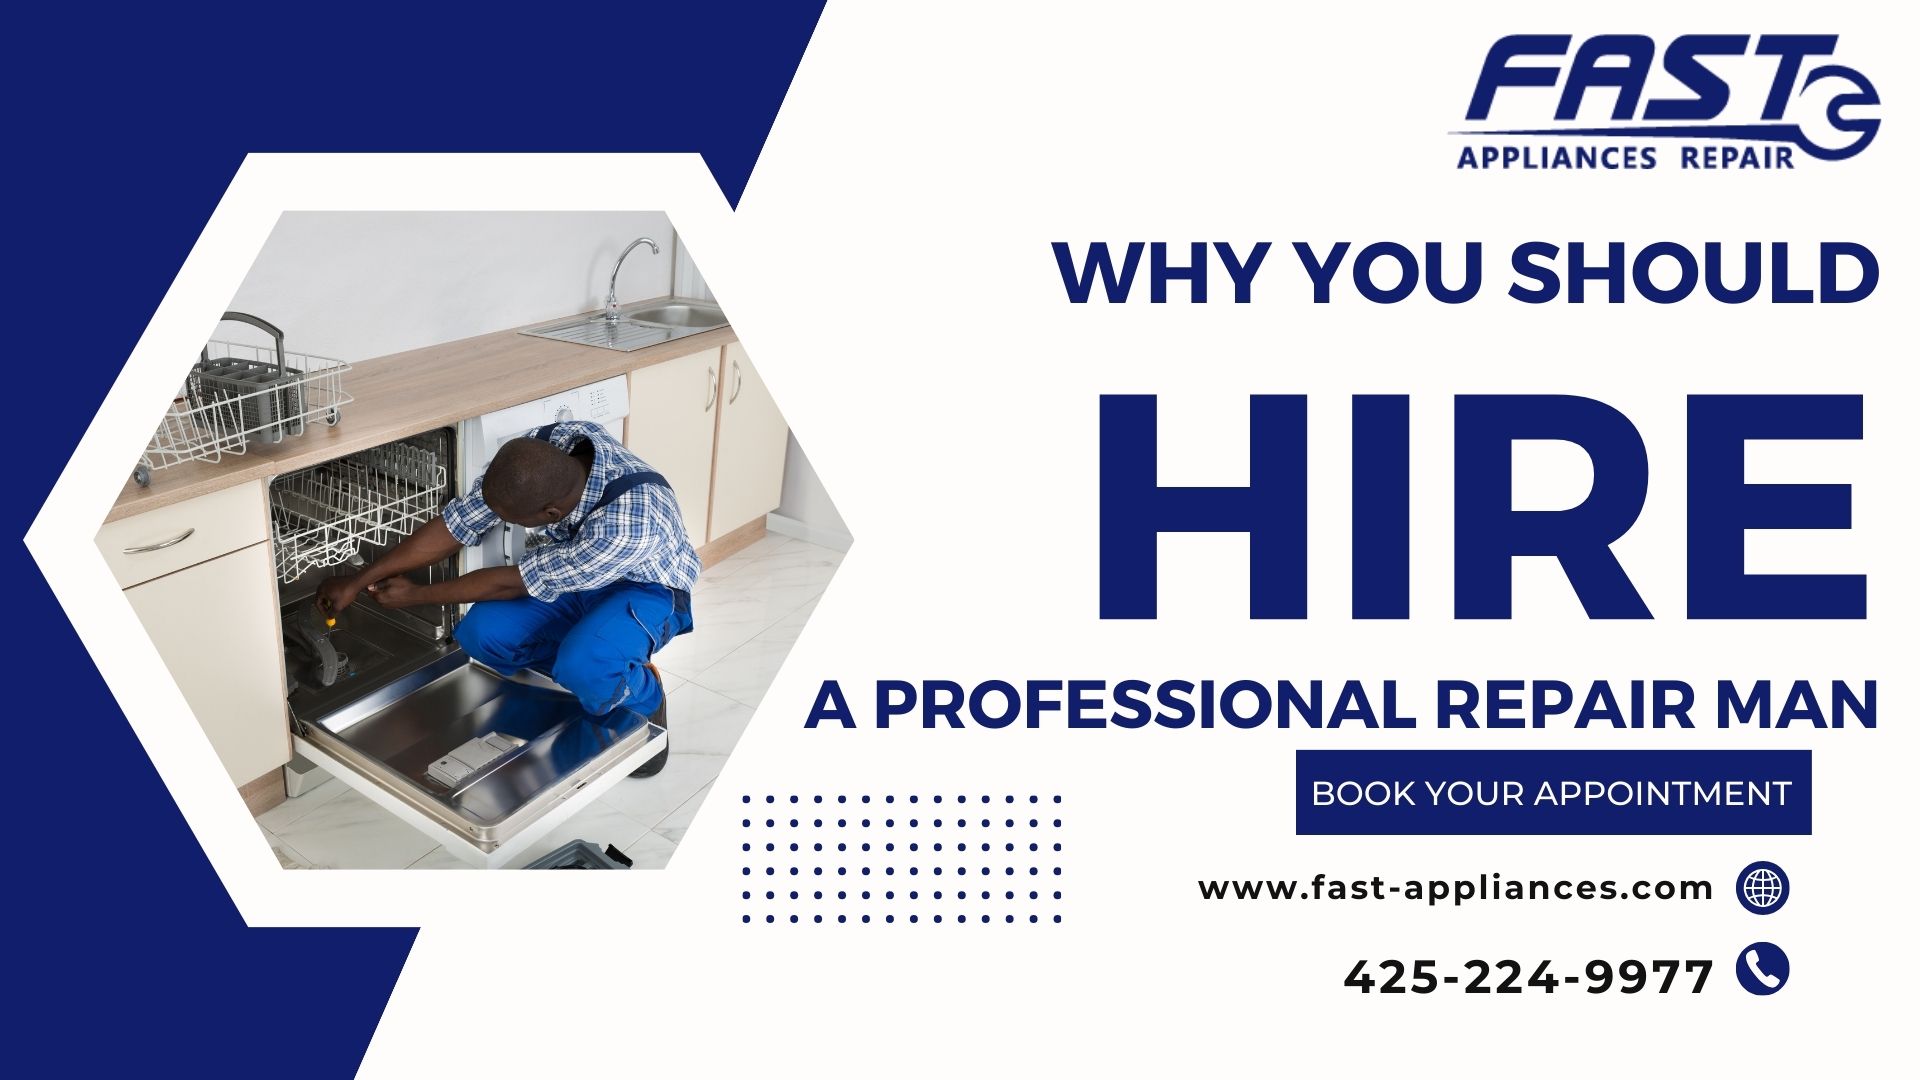 Why You Should Hire a Professional Repairman for Your Valuable Home Appliances by Fast Appliances Repair WA, USA